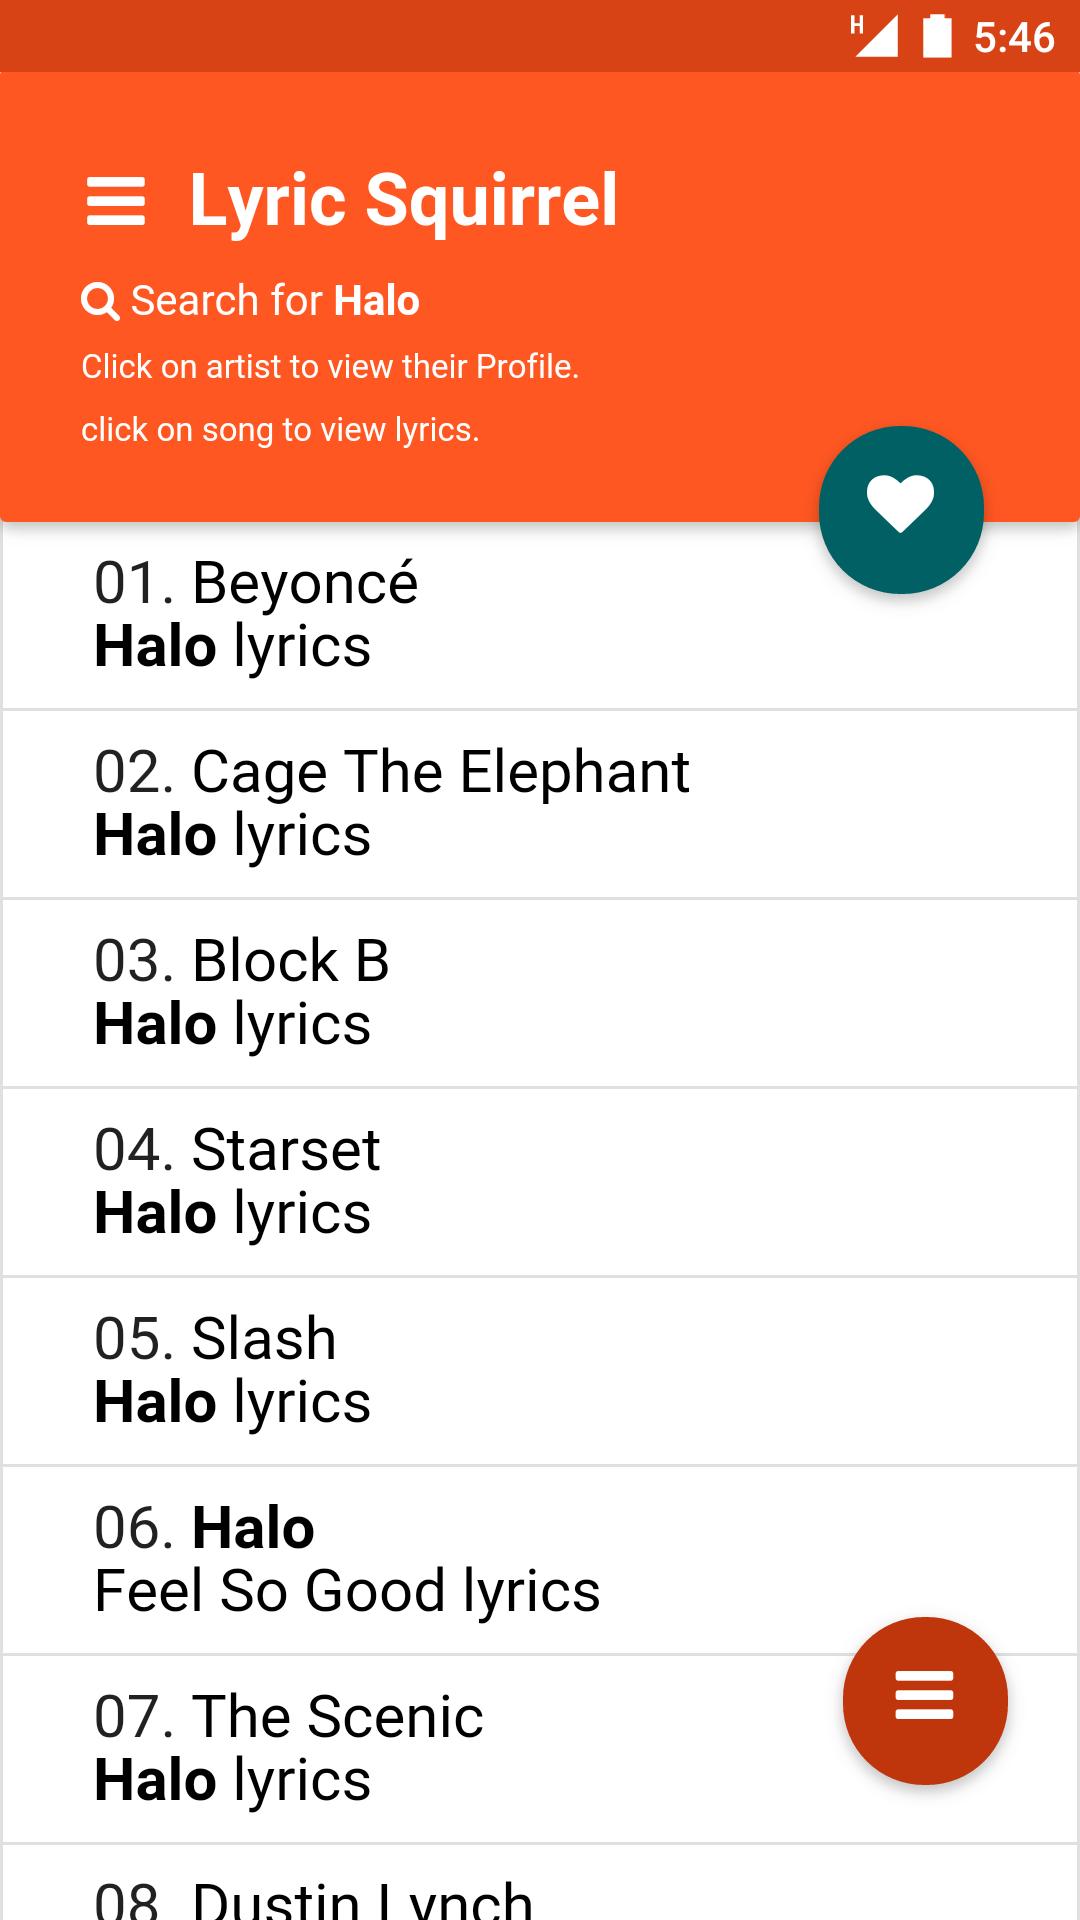 Lyric Squirrel for Android - APK Download